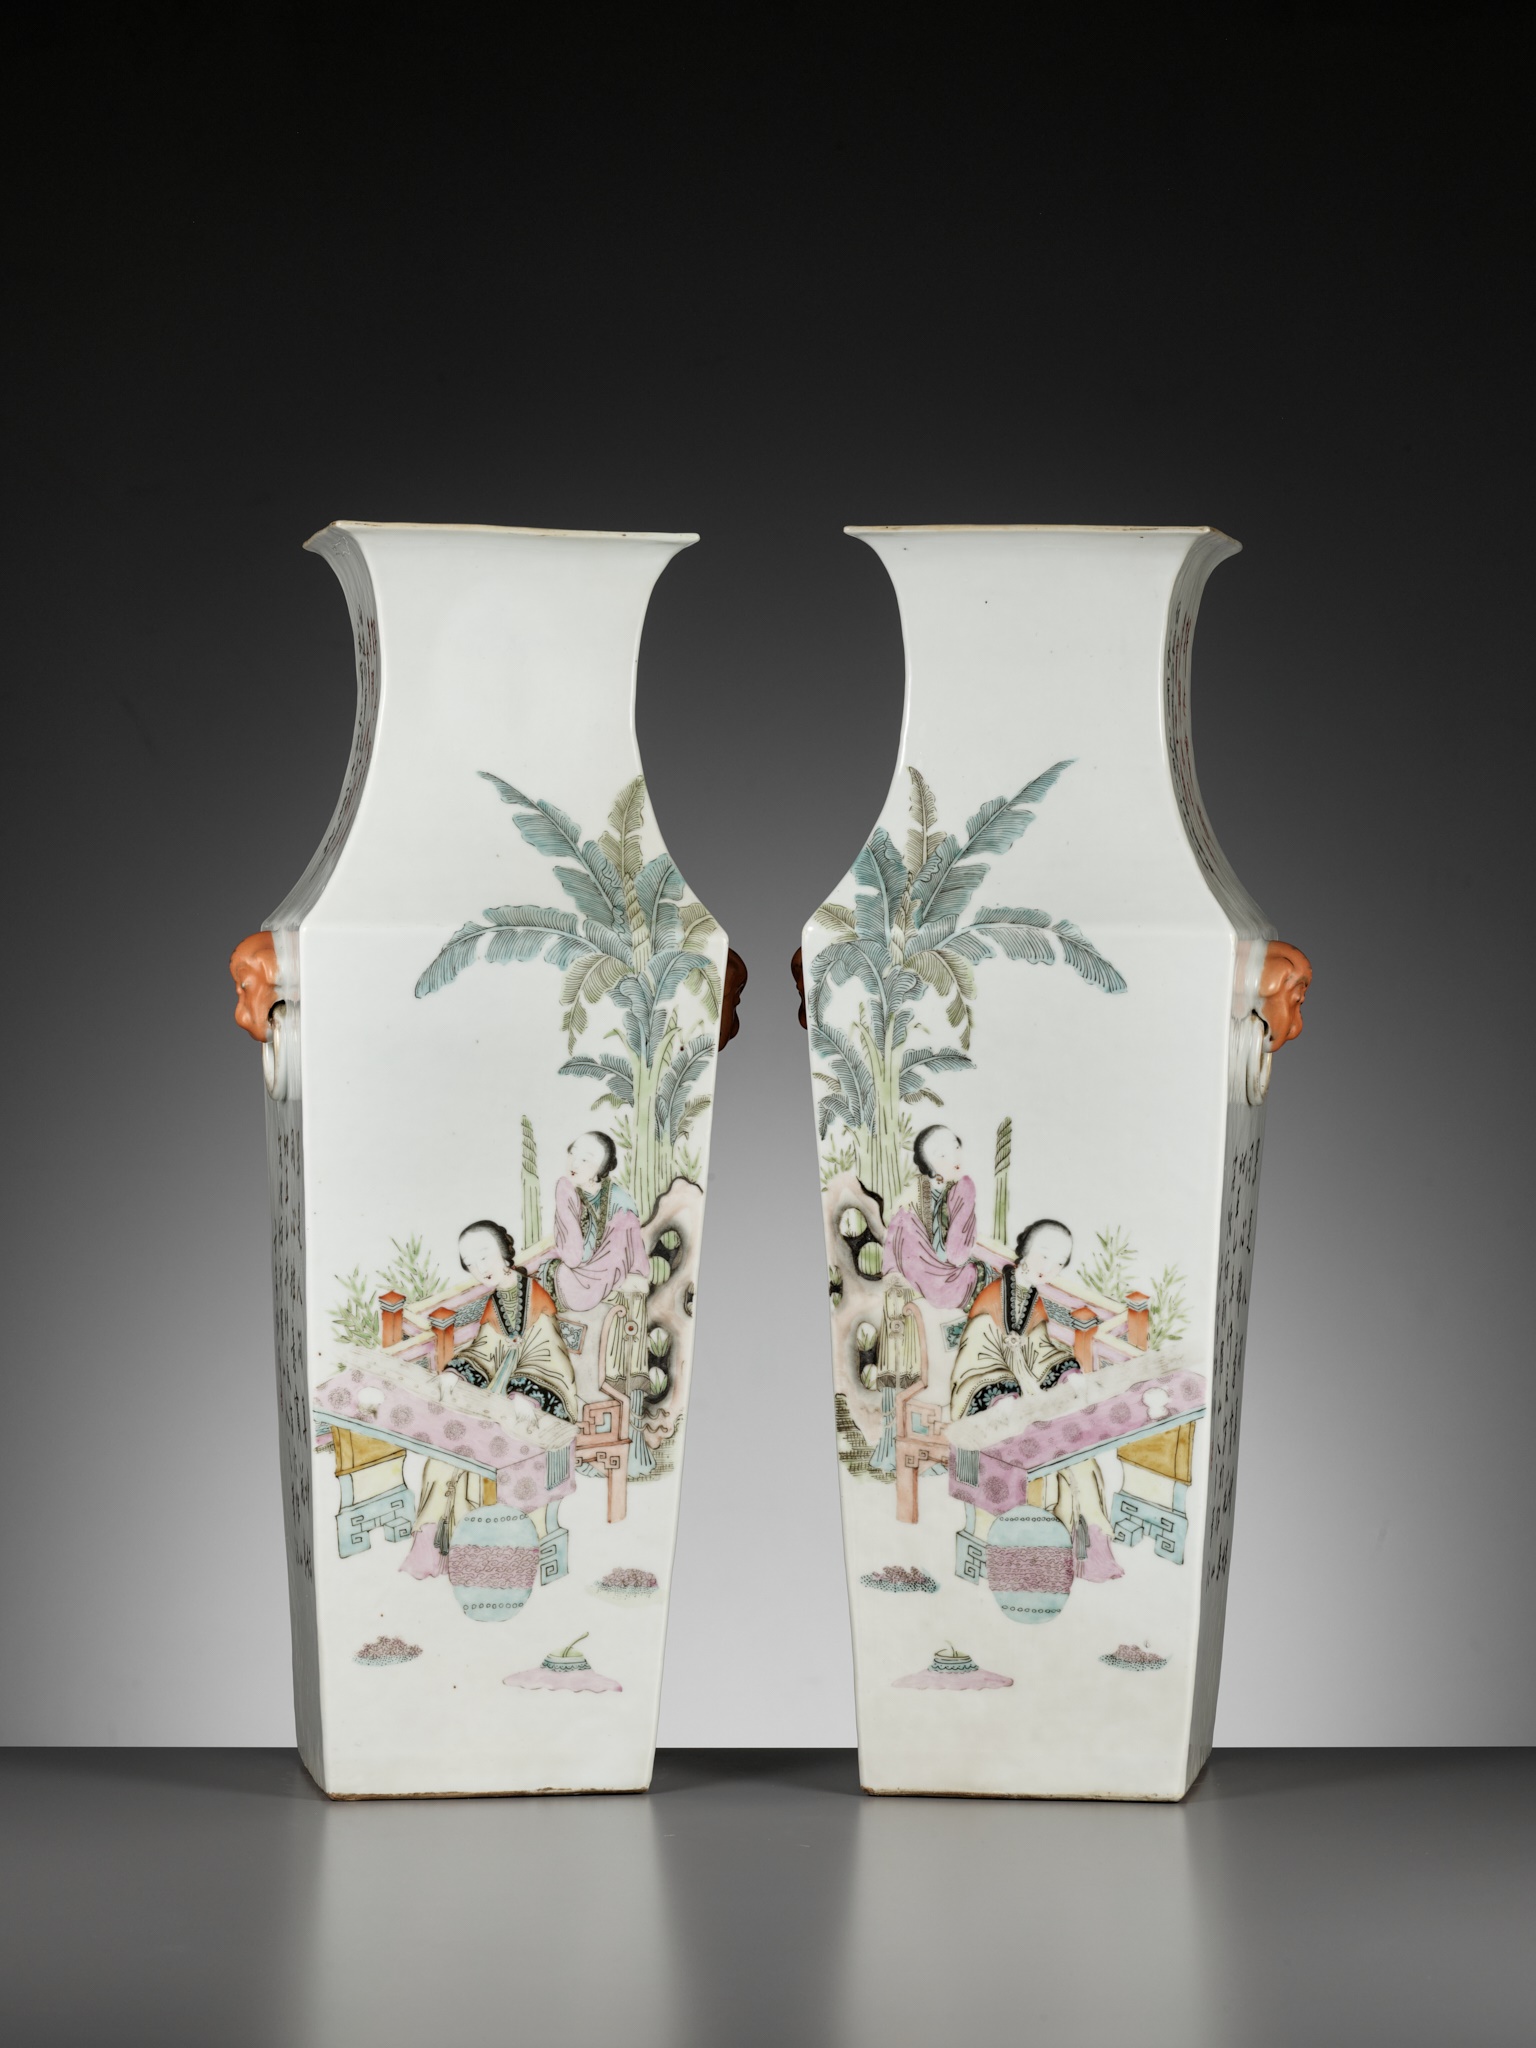 A PAIR OF LARGE QIANJIANG CAI VASES, BY FANG JIAZHEN, CHINA, DATED 1895 - Image 10 of 17